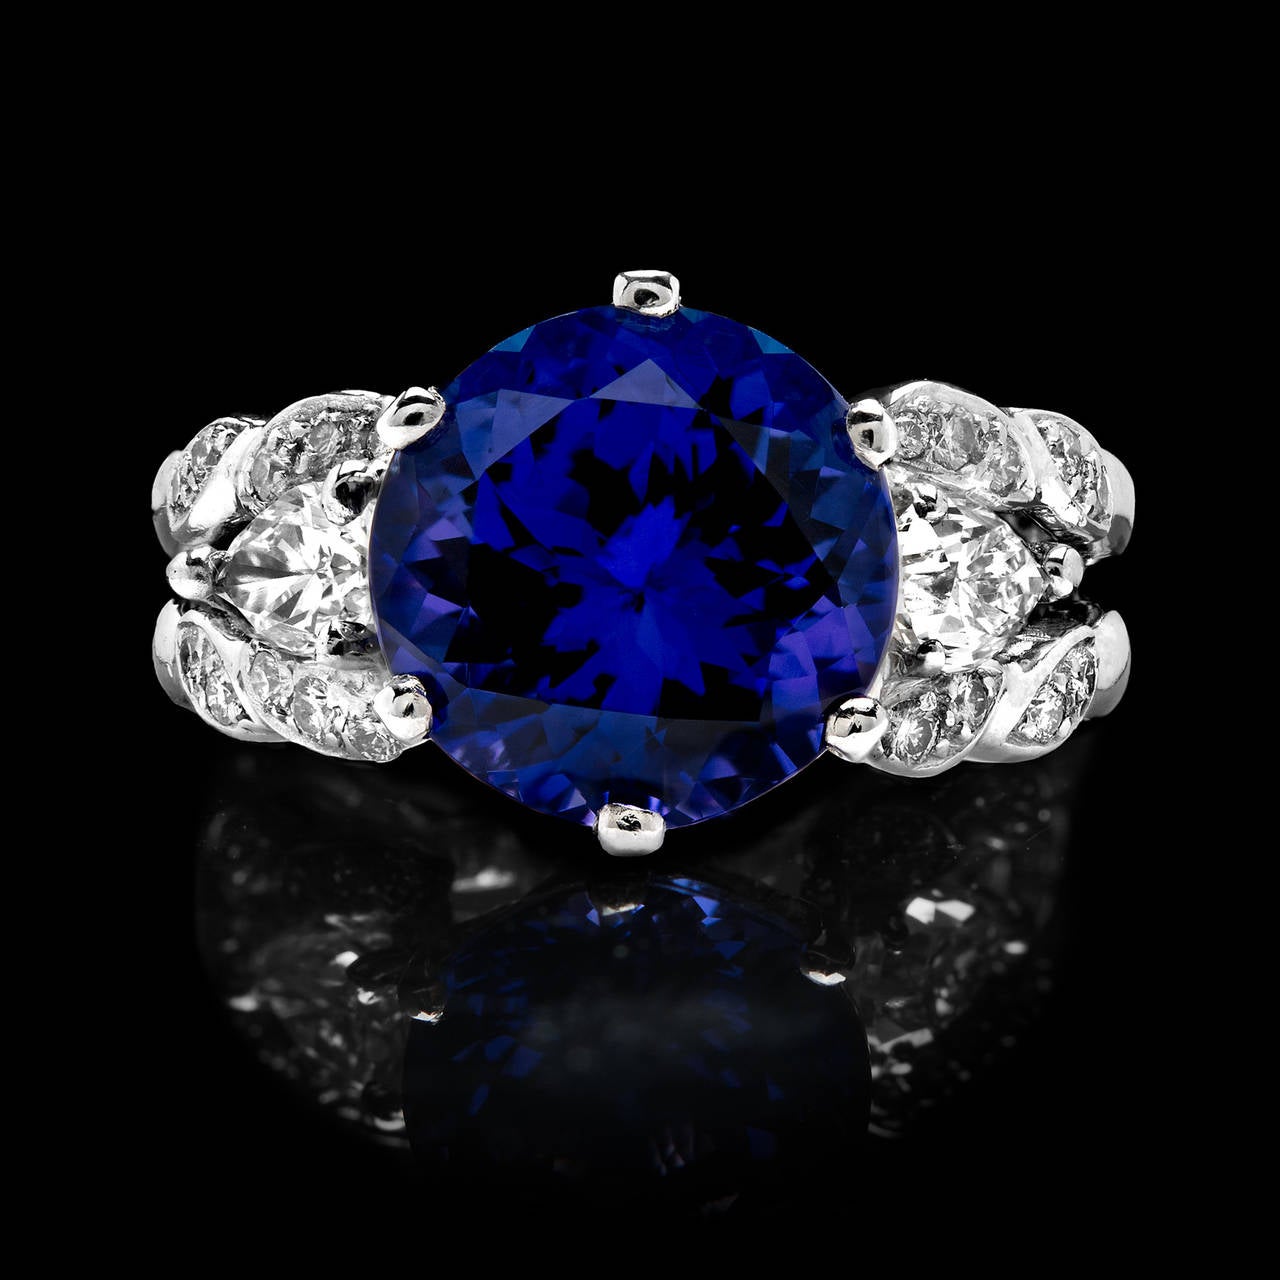 Platinum Ring Features a Vibrant Purplish Blue 5.25 Carat Tanzanite Flanked by 1.00 Carat of Pear Shaped and Round Cut Diamonds. The ring measures 12mm to 4mm and is a size 7.0. Total weight is 13.4 grams.